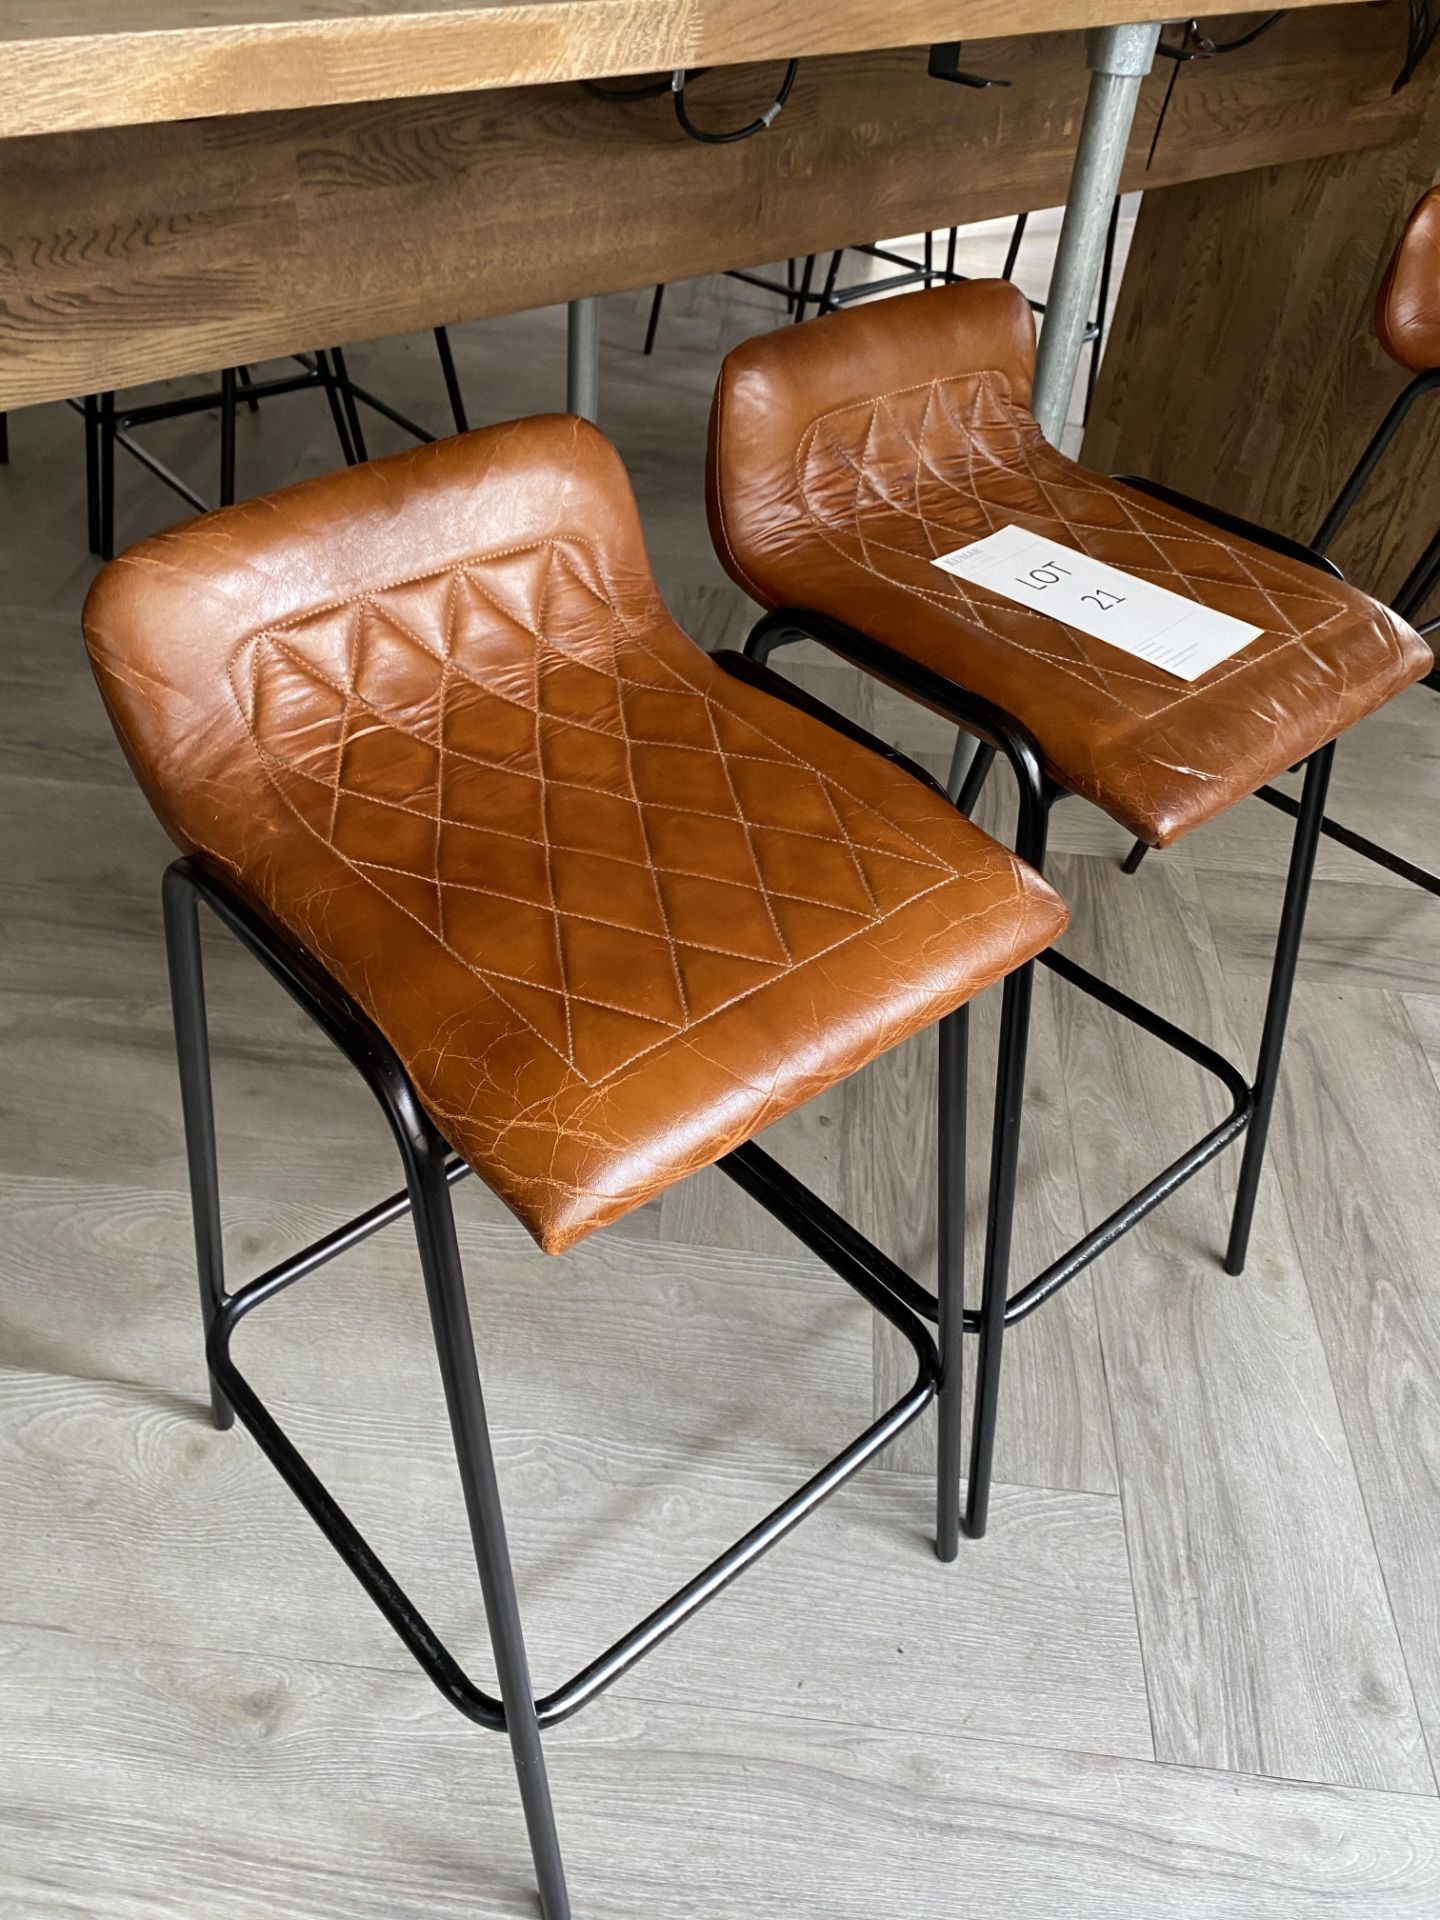 2x Leather Upholstered Bar Stools - New Cost £120 per stool - Image 2 of 3